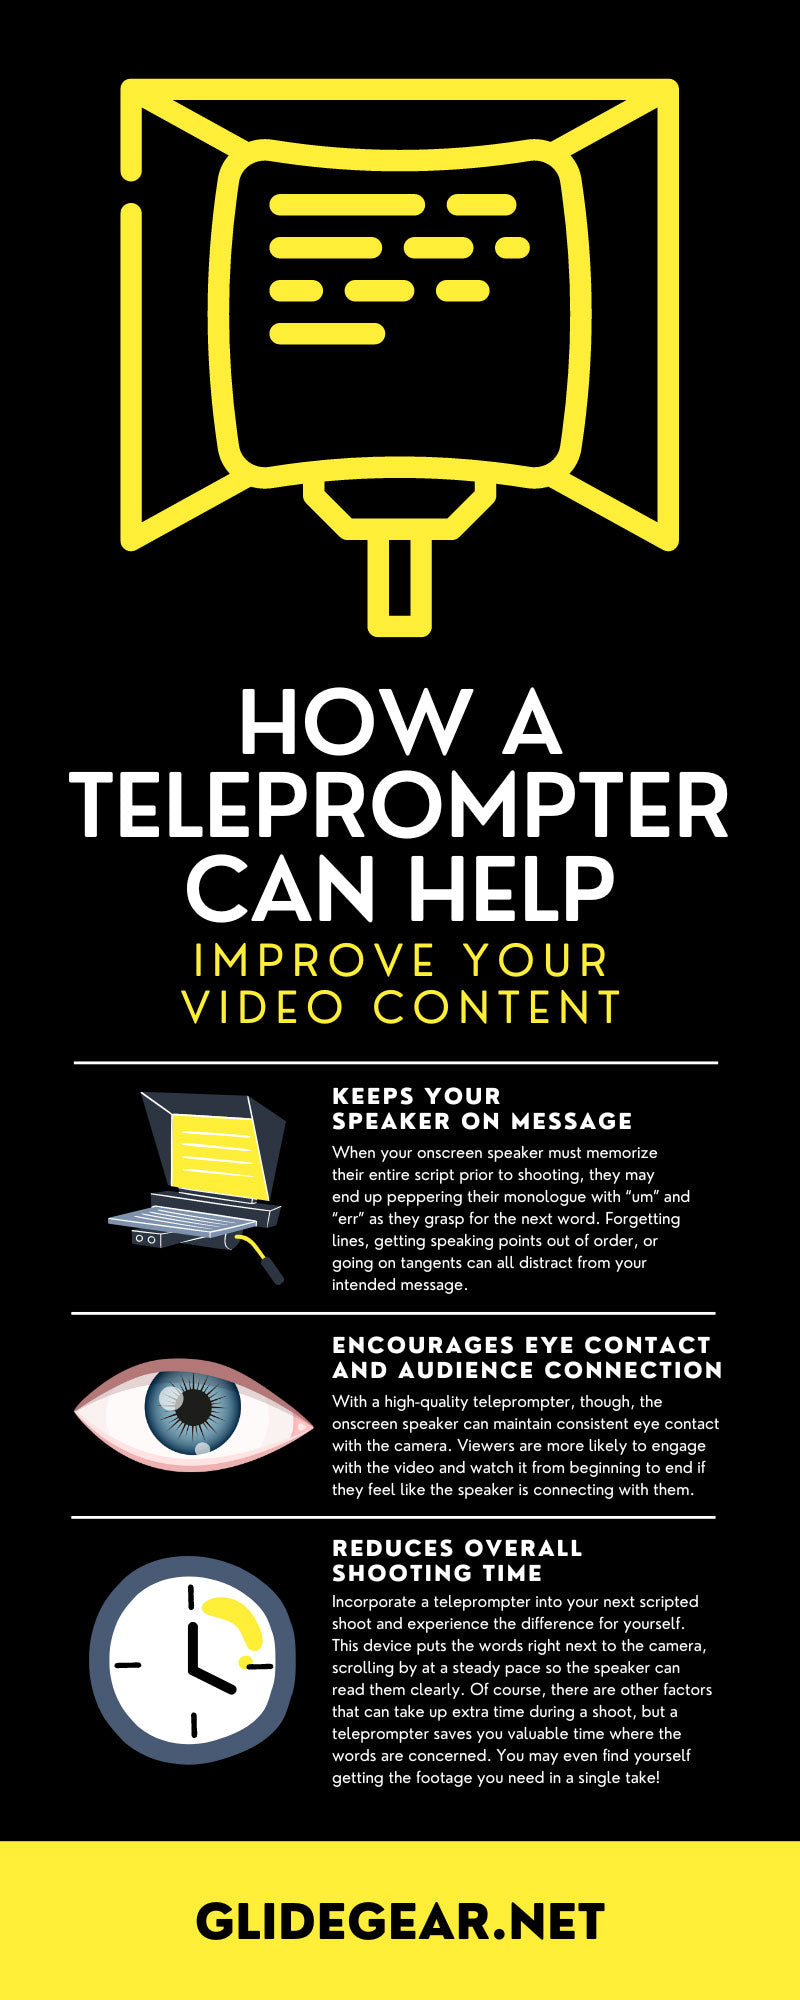 How a Teleprompter Can Help Improve Your Video Content